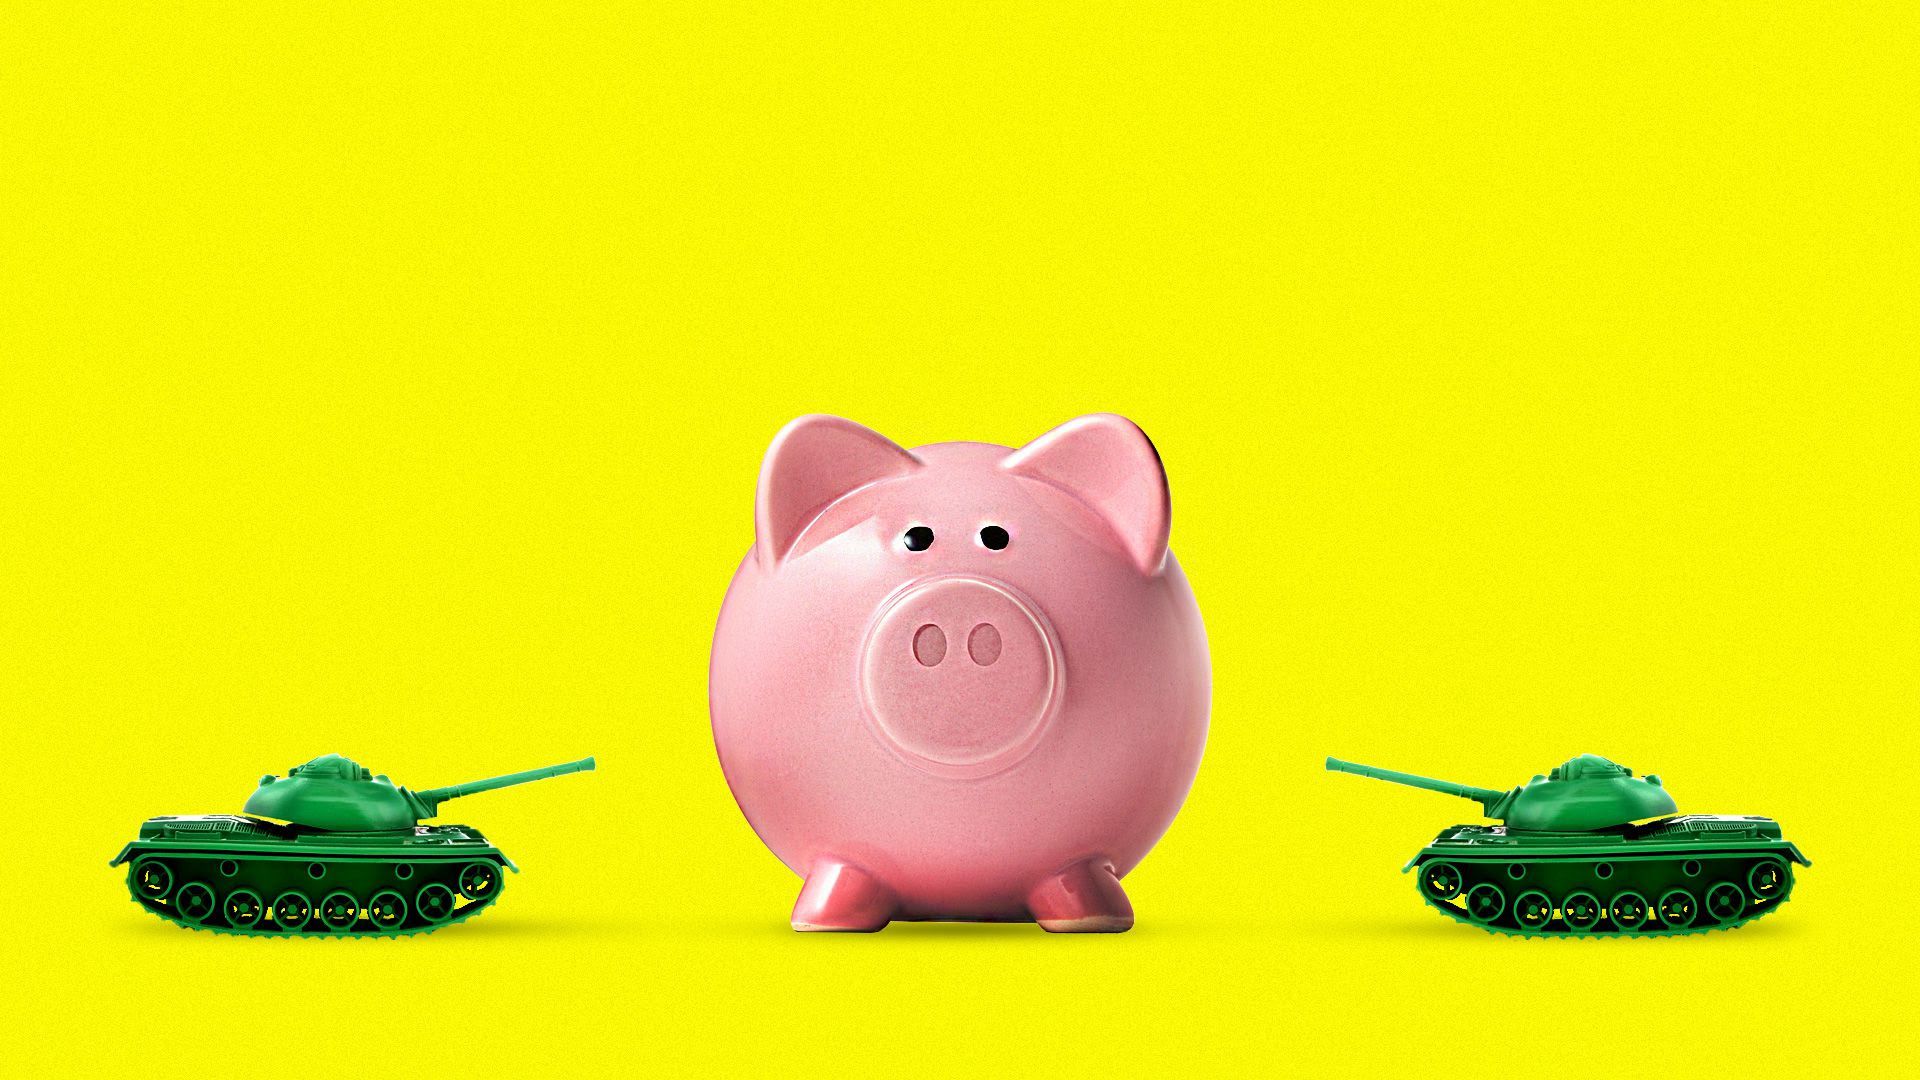 A piggy bank being attacked by two tankers on either side of it